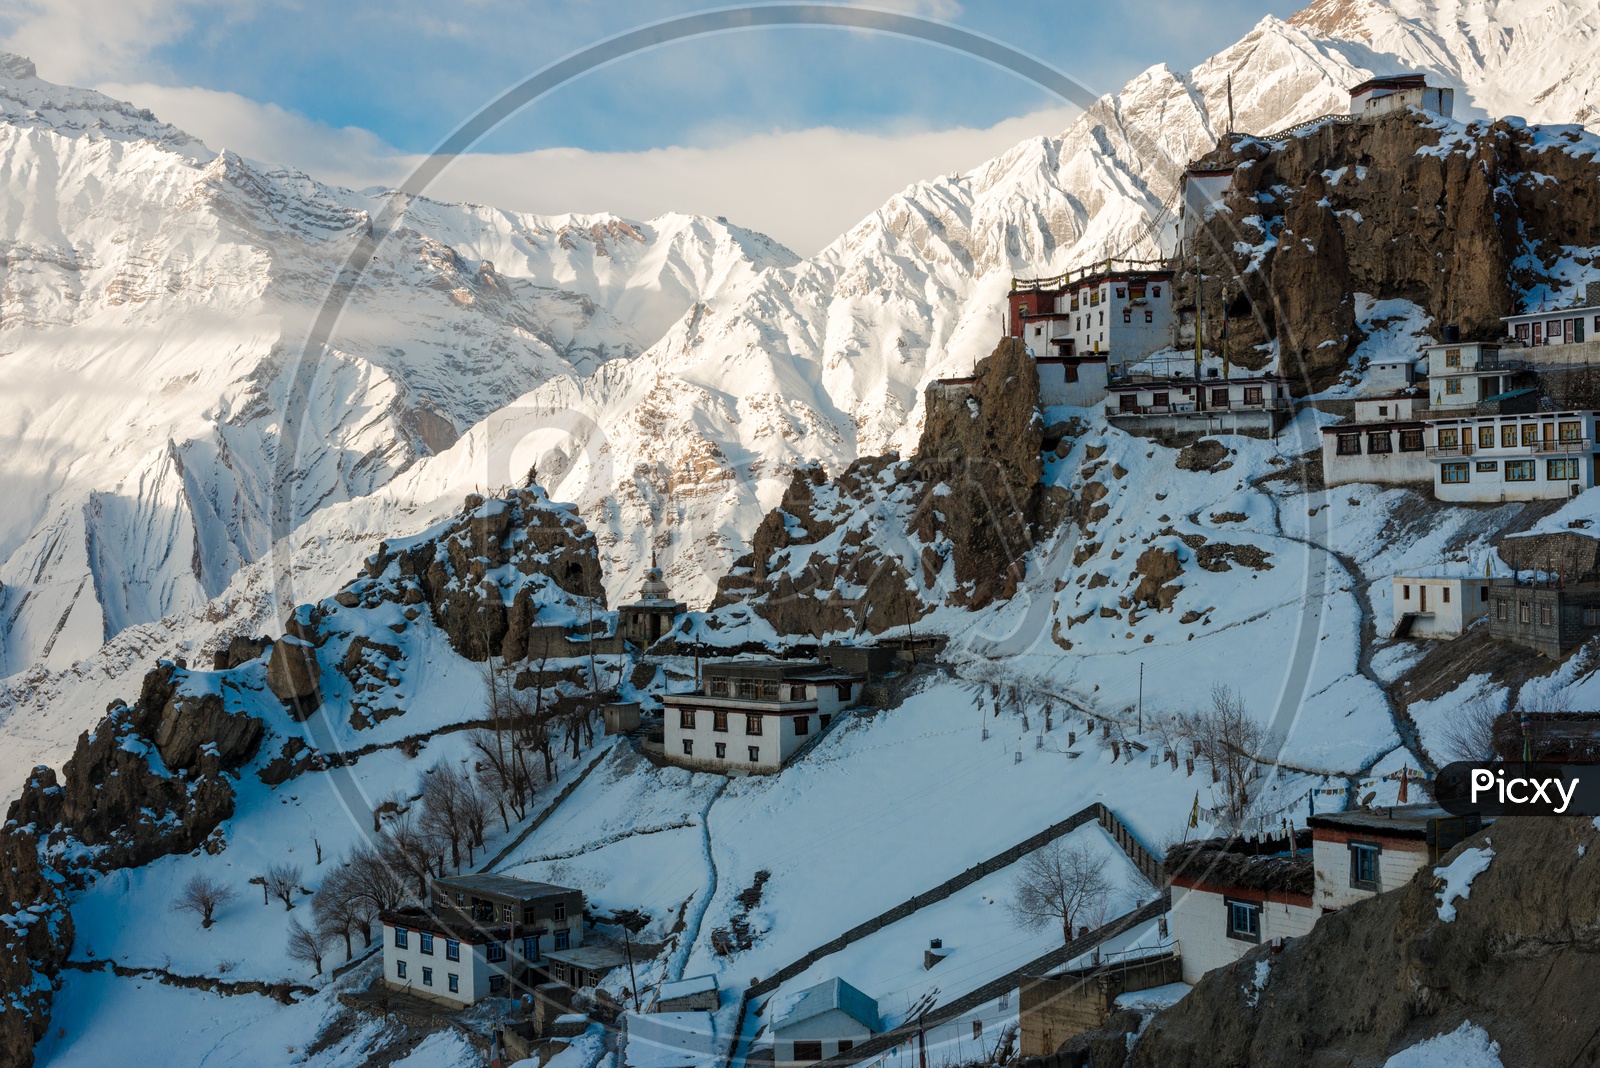 Dhankar Village Covered in Snow Surrounded by Snowy Himalayan Mountains